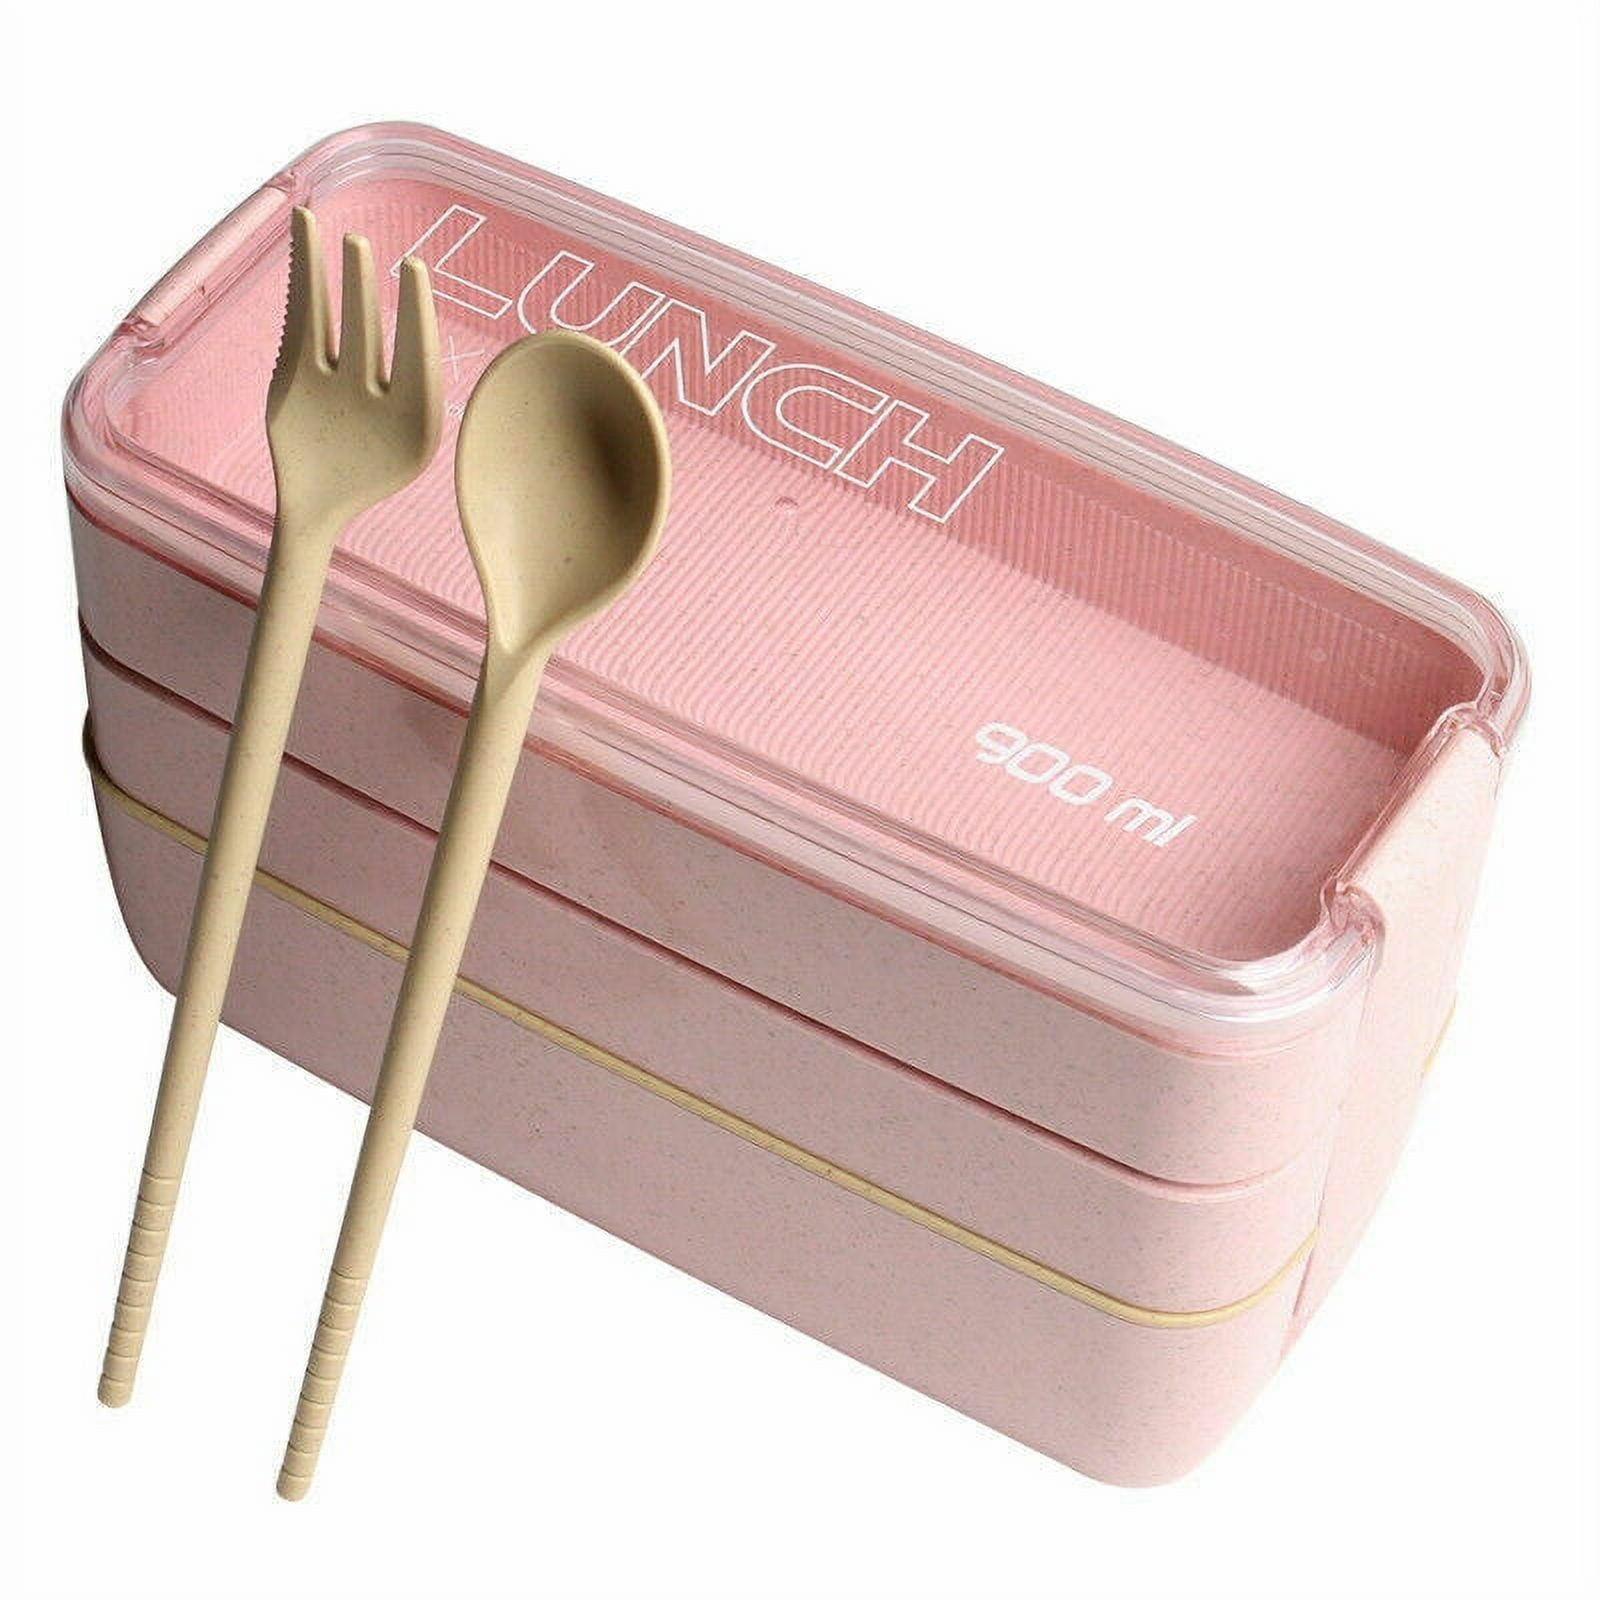 Ycolew Bento Lunch Box For Adults, Kids Leakproof Meal Prep Portion Control  Boxes Japanese Style for Boys Girls Teens 3 Removable Compartment Slim